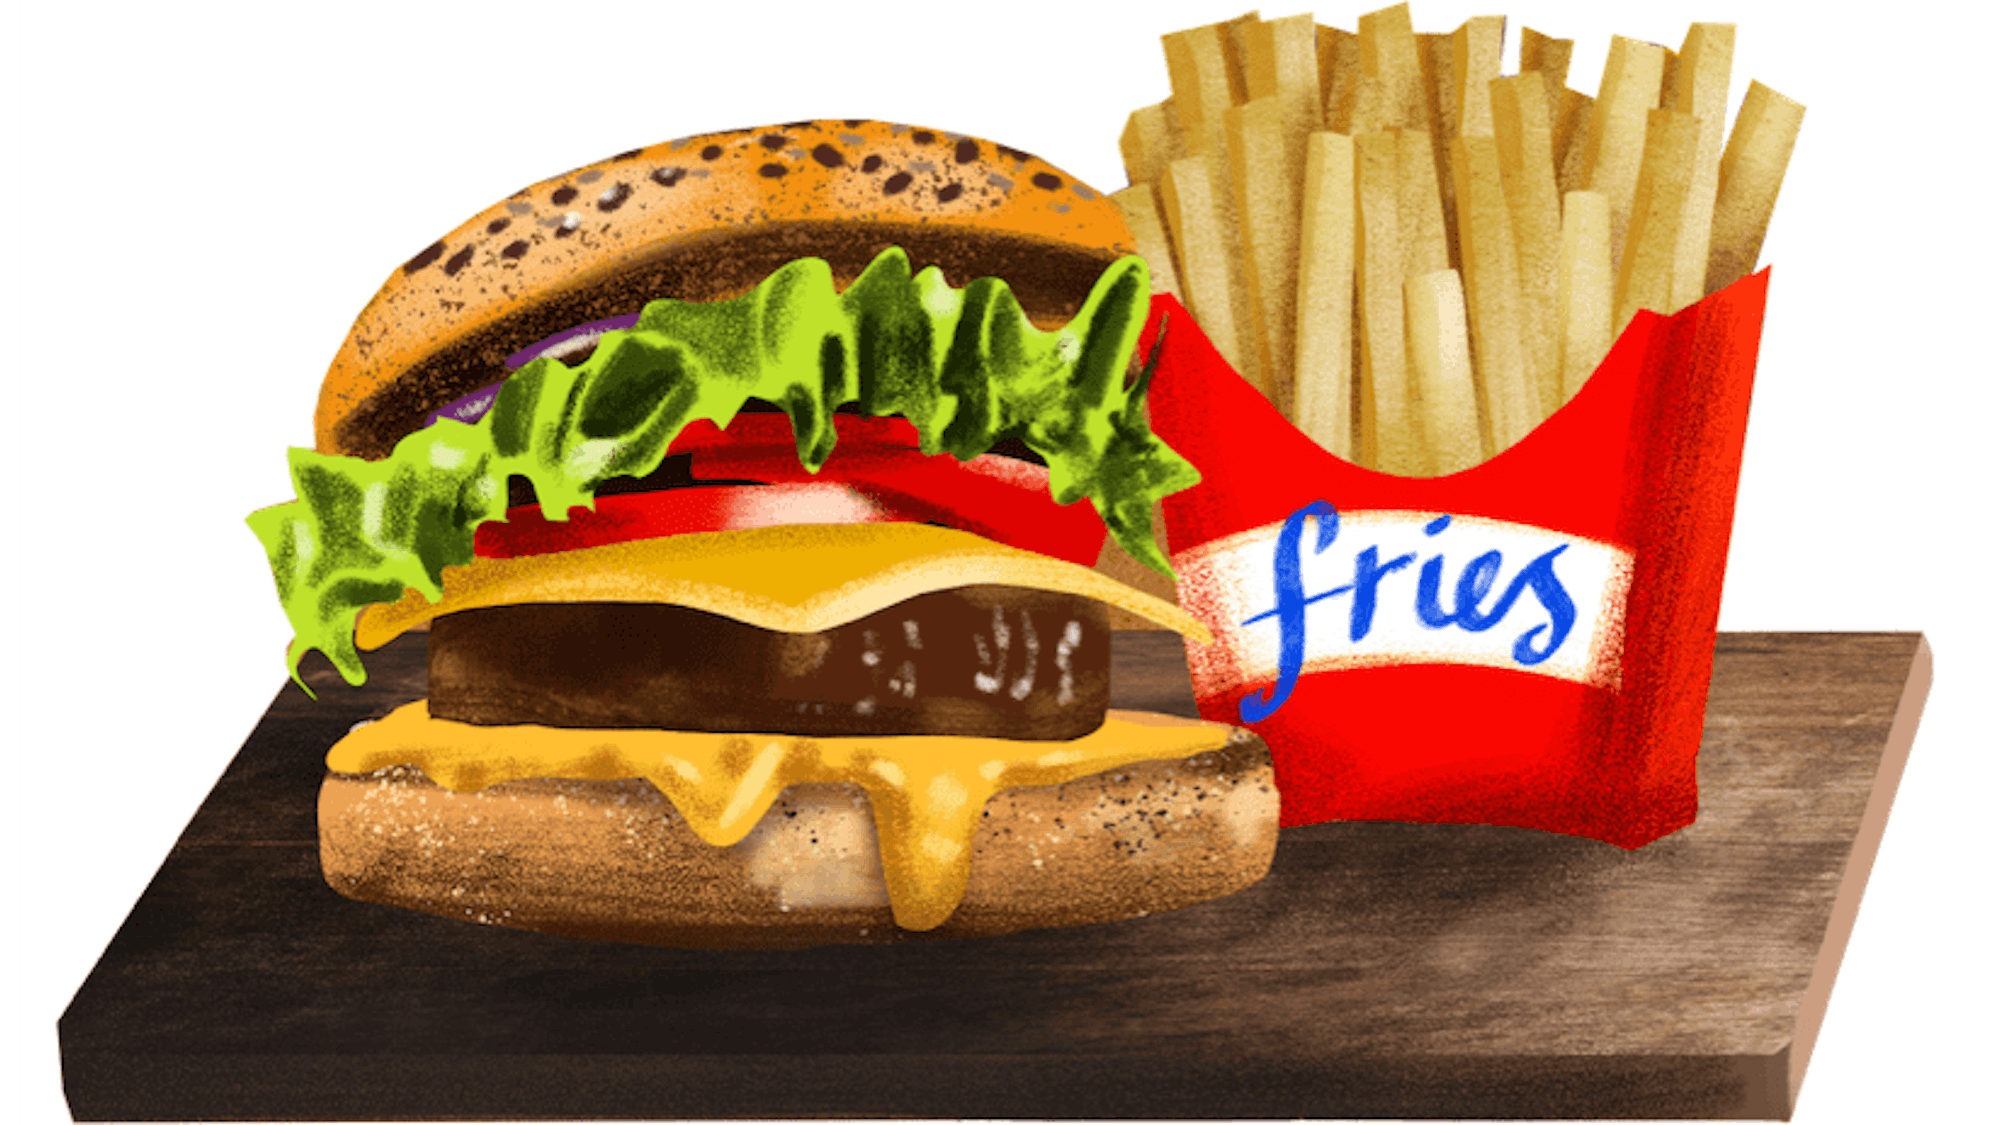 A delicious melted cheese burger (complete with tomato, lettuce, and onion) sits in a seeded bun. To its left are some fries, in a red contained with blue writing that reads: ‘fries.’